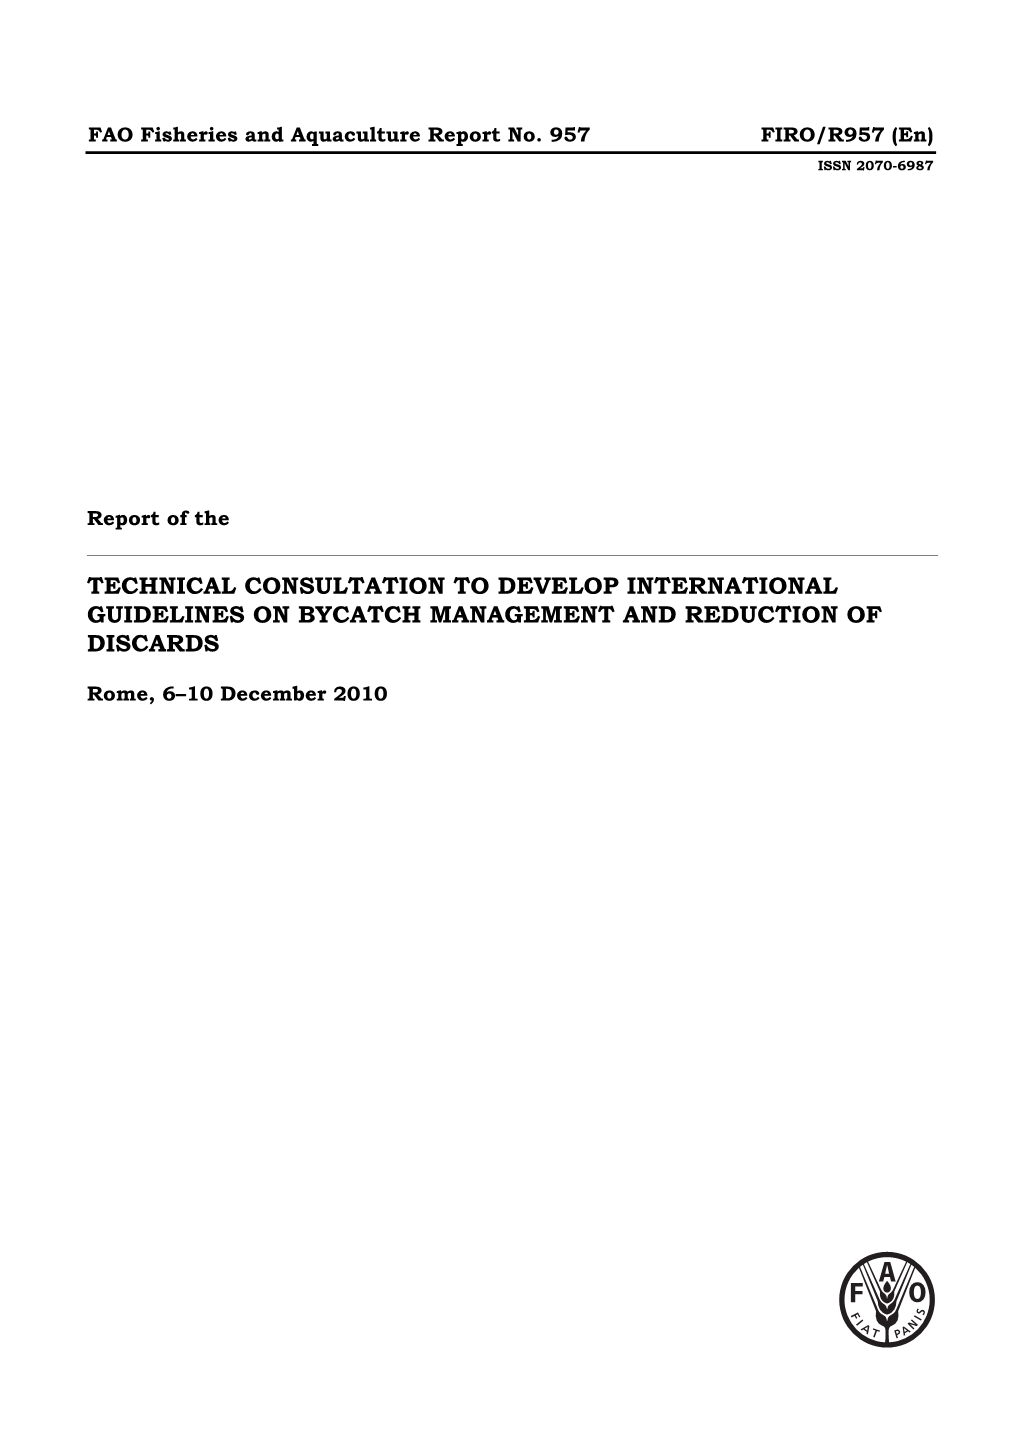 Report of the Technical Consultation to Develop International Guidelines on Bycatch Management and Reduction of Discards Adopted on 10 December 2010 in Rome